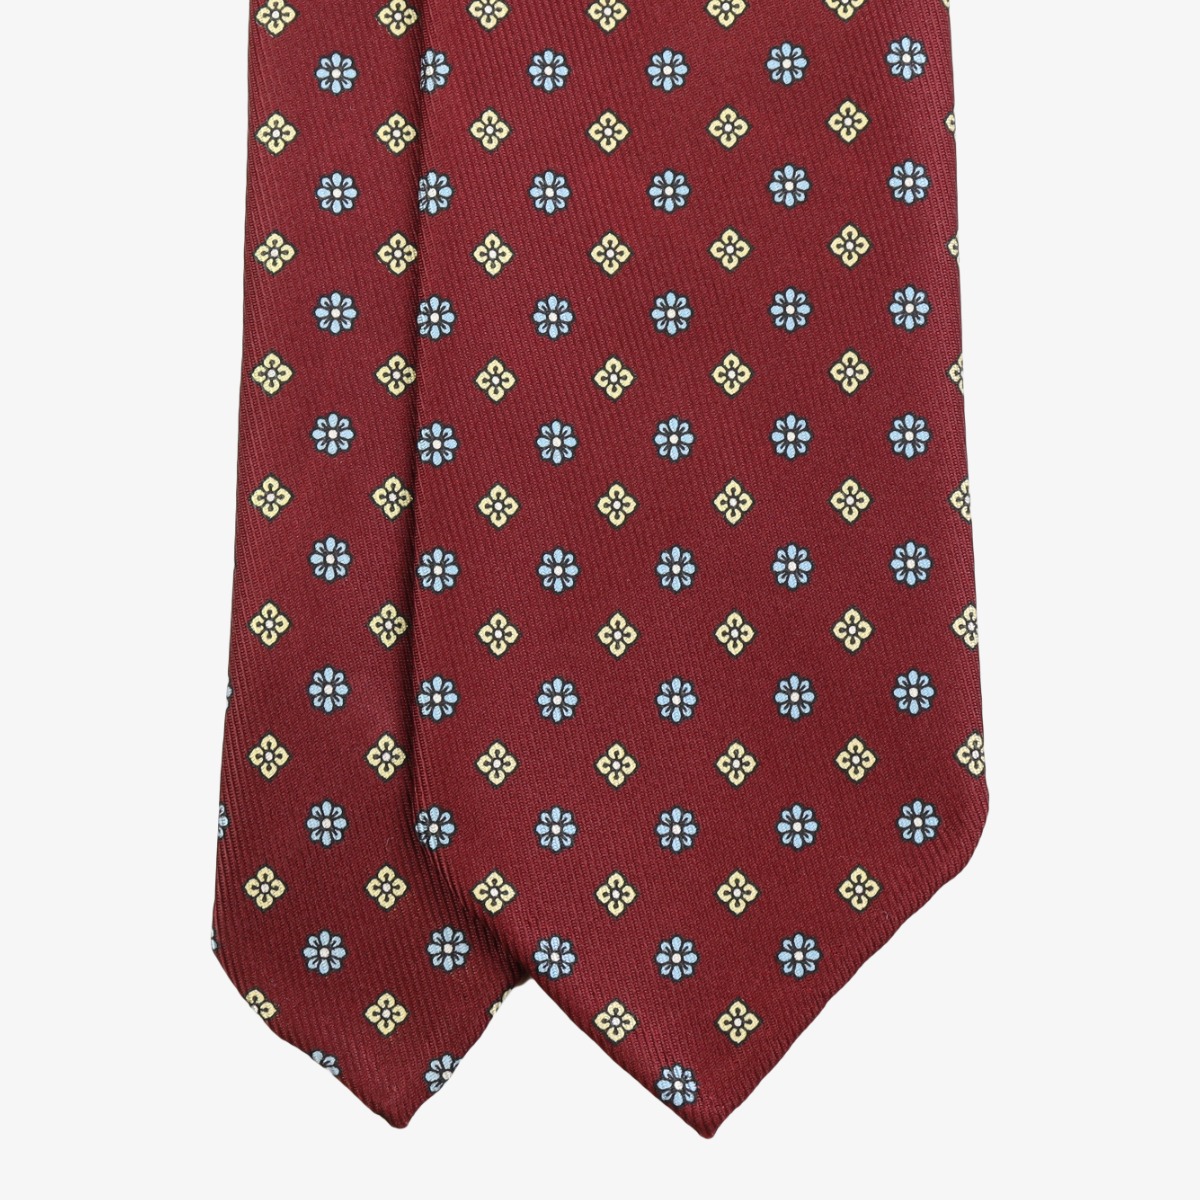 Shibumi Firenze 50oz red silk tie with blue and yellow floral pattern